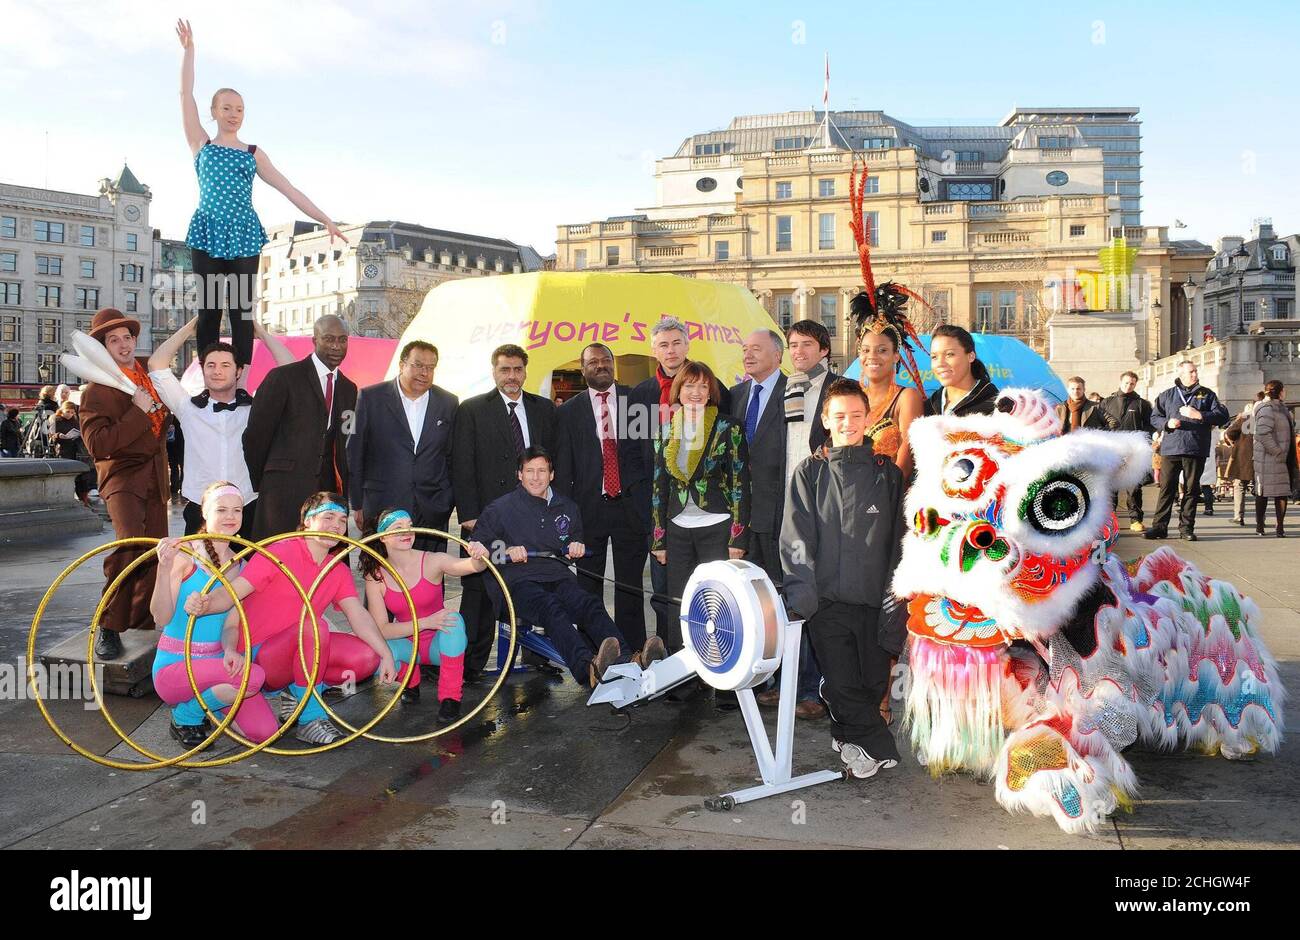 Performers from The Circus Space surround Ozwald Boateng, menswear designer, Iqbal Wahhab, restaurateur, James Caan, a Dragon's Den millionaire, Lord Coe, Chairman of the London 2012 Organising Committee, Manny Lewis, Chief Executive of the London Development Agency, Jonathan Edwards , former European and World triple jump champion, Tessa Jowell, Olympic Minister, Mayor of London, Ken Livingstone, Giles Long, ex Paralympic swimmer, Thomas Daley, 13, a diving prodigy from Plymouth, Simone Griffith , a Notting Hill carnival dancer and Shenaze Reade, 19, a world -class cycling champion.(L to R).  Stock Photo